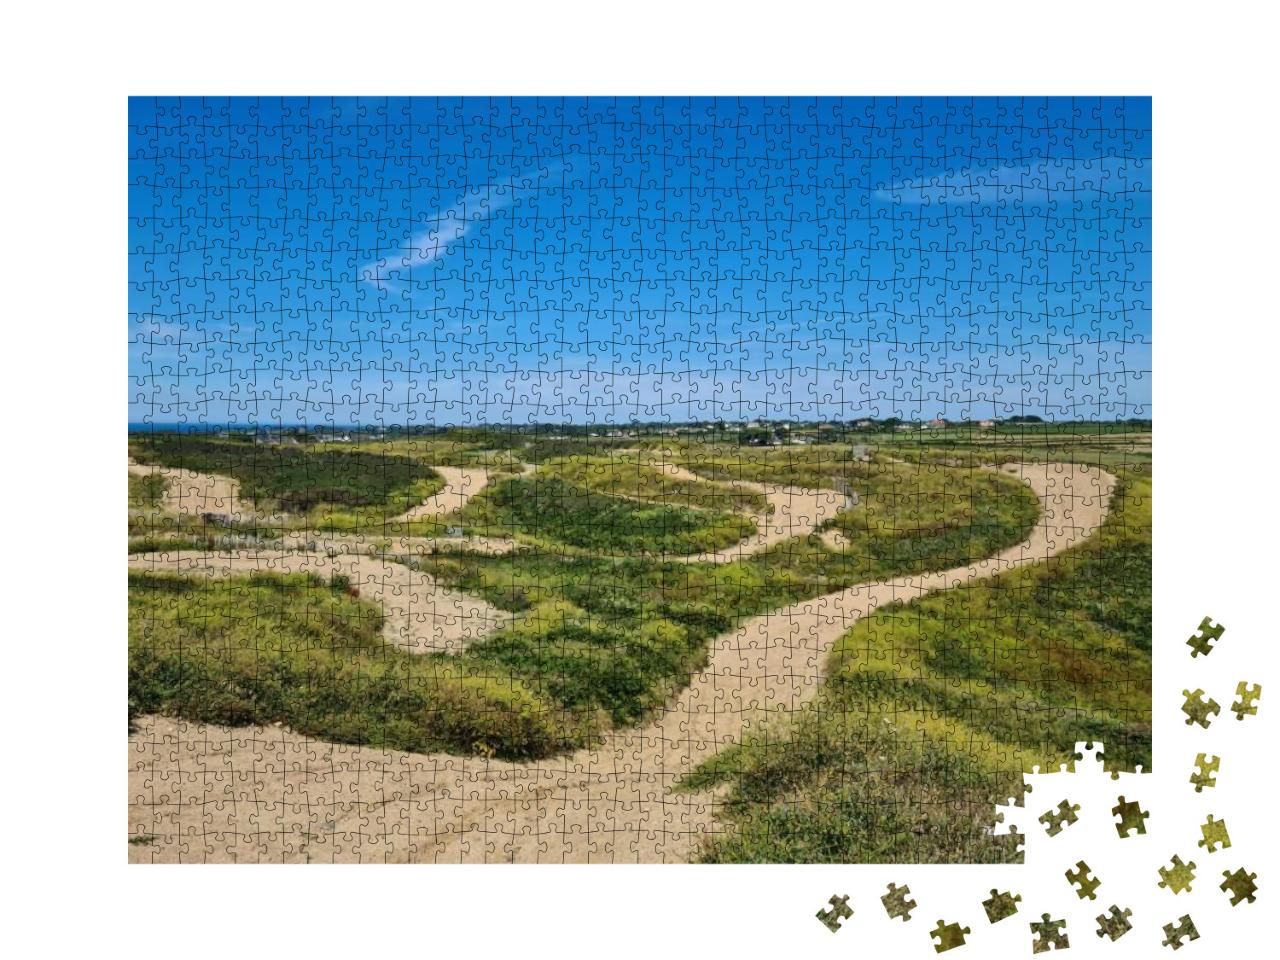 Pleinmont, Motocross Track, Guernsey Channel Islands... Jigsaw Puzzle with 1000 pieces